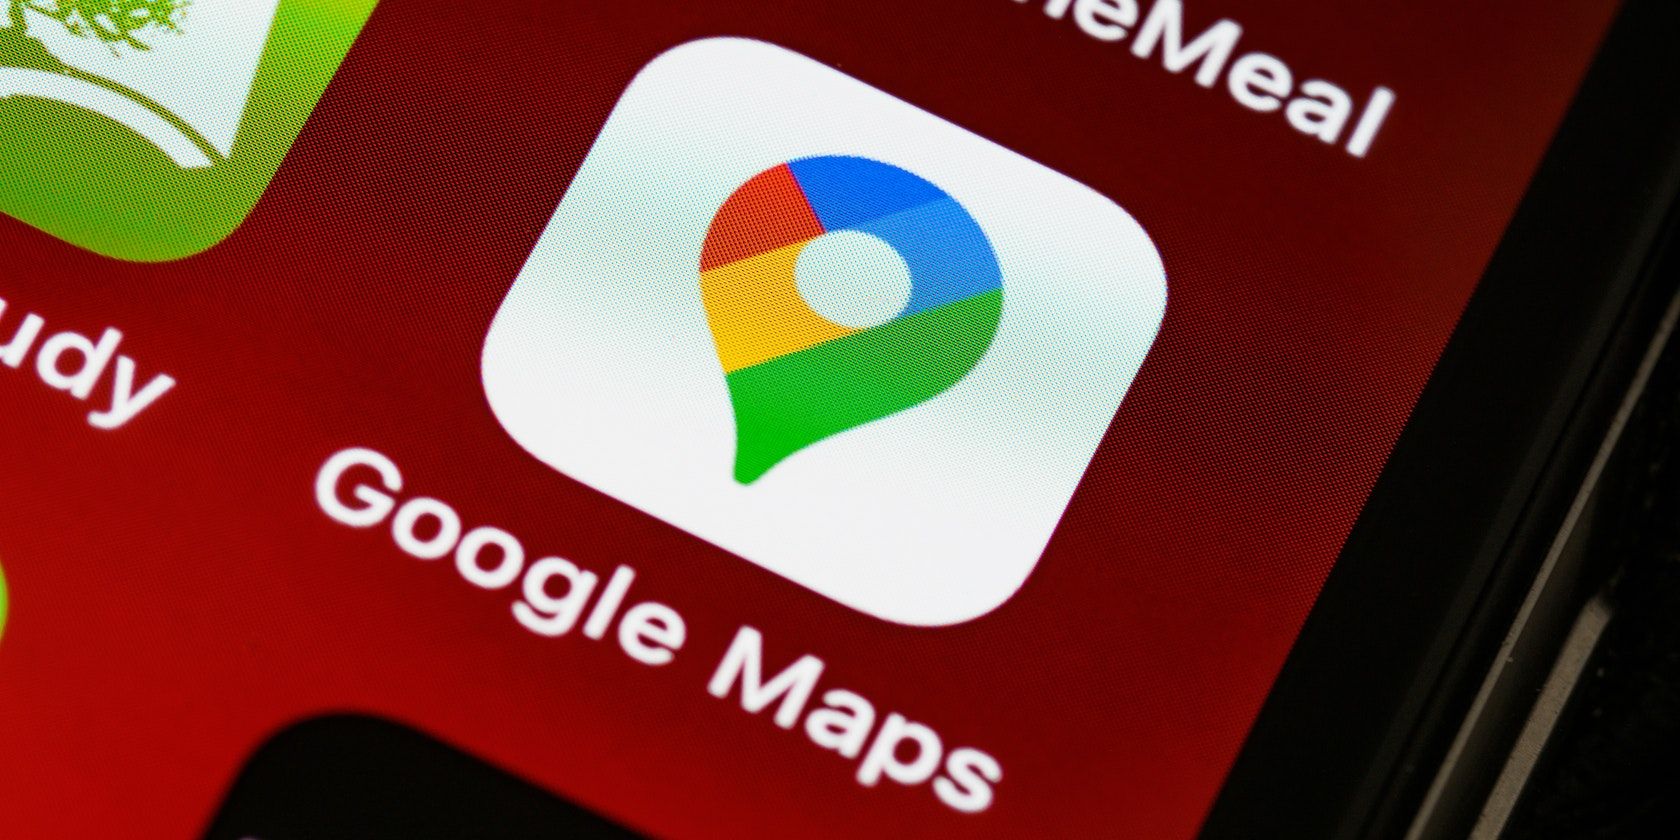 Google Maps app icon on a screen